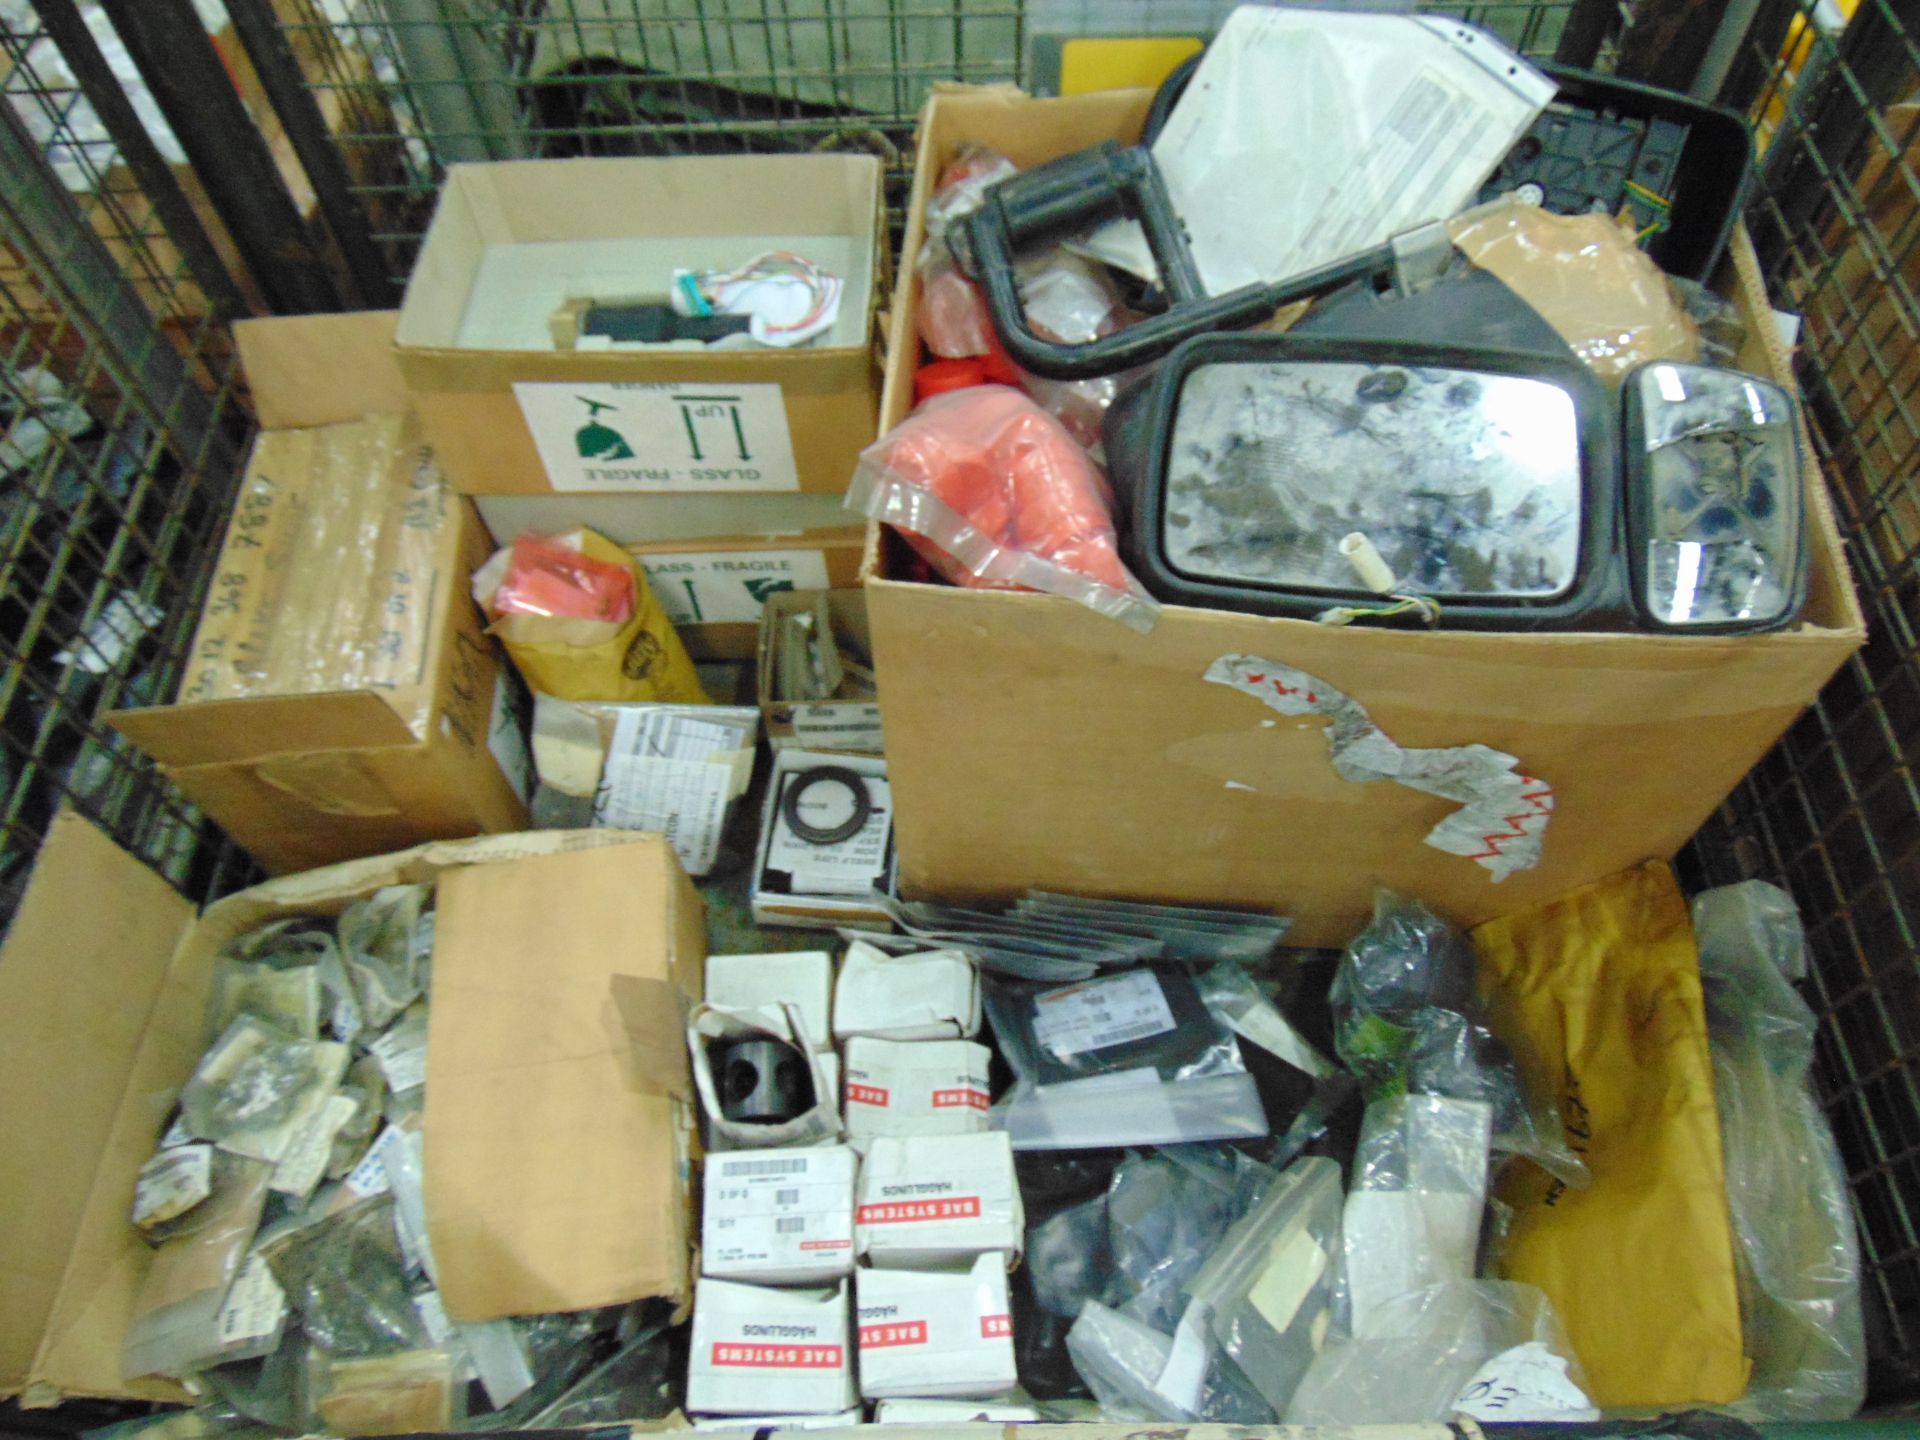 Mixed Stillage consisting of Mirrors, Valves, Gaskets, Copper Grease etc.